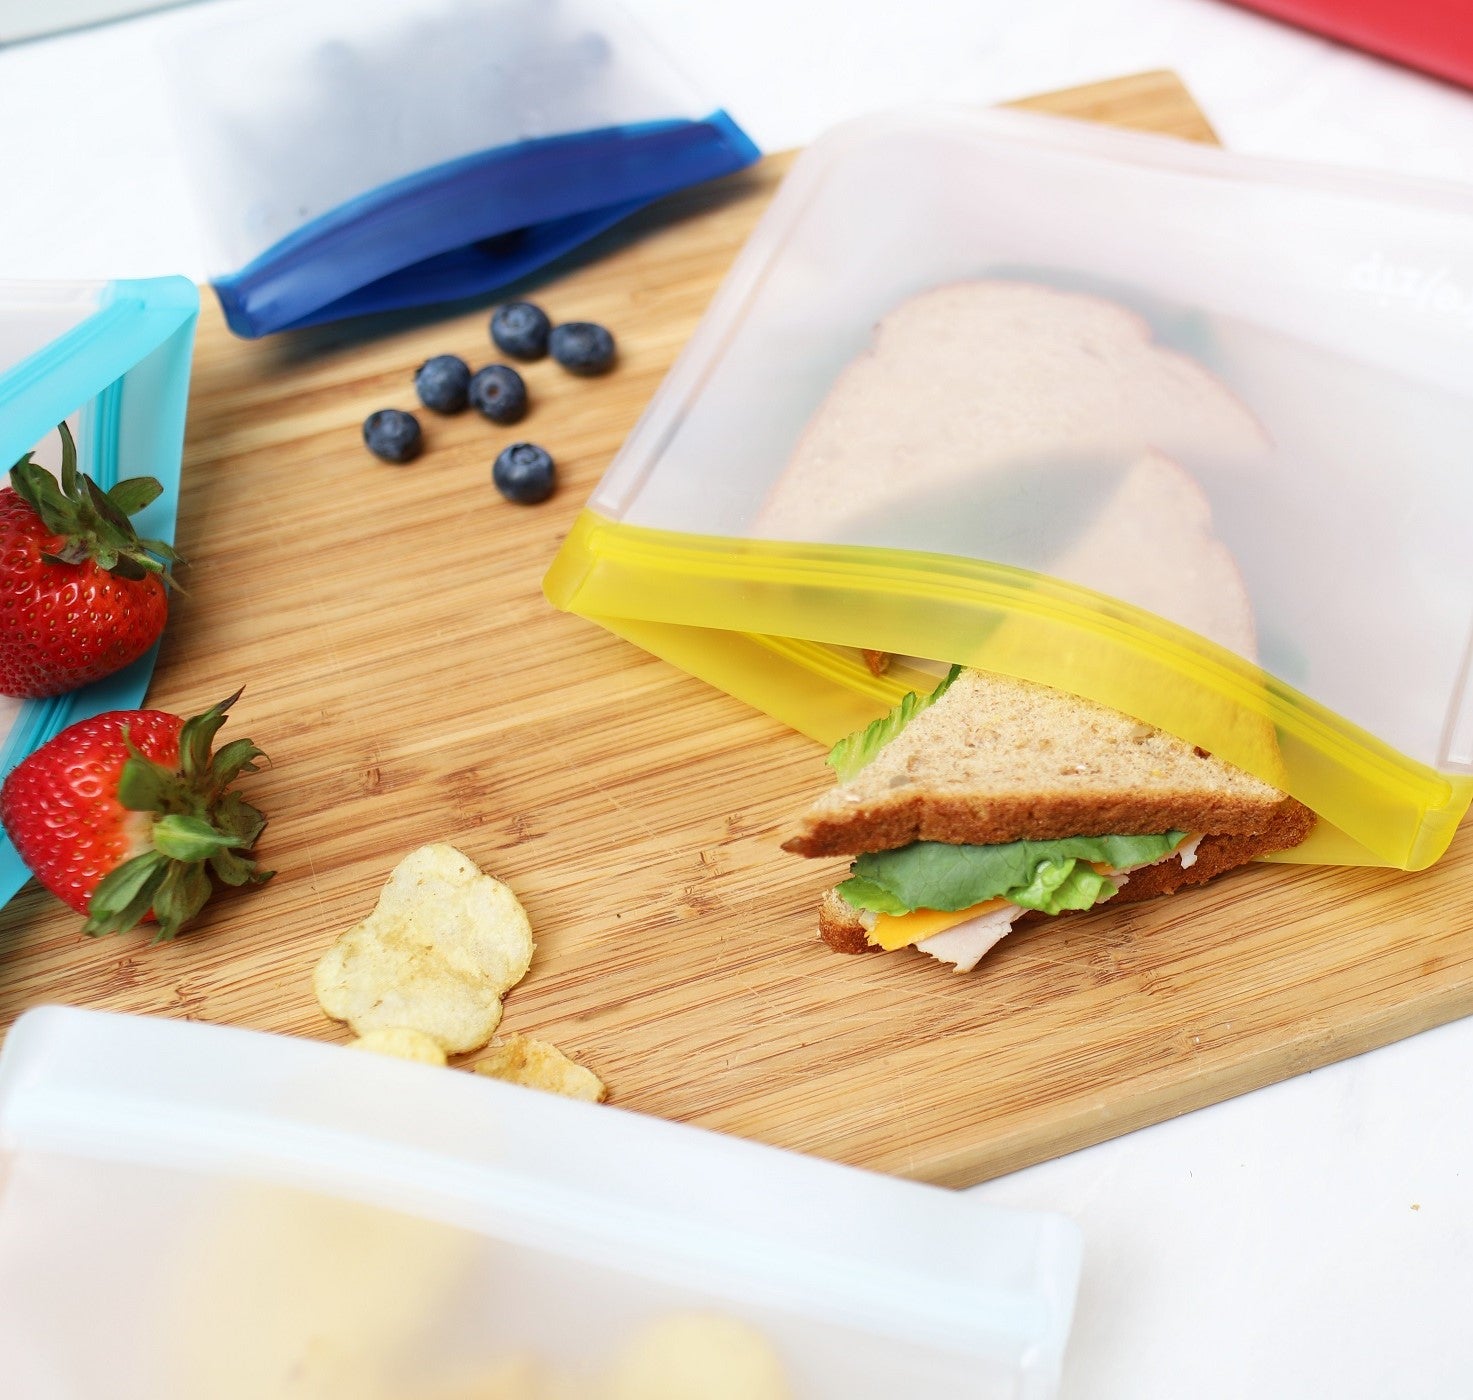 Back to School with rezip lunch sandwich bags, snack and standup snack reusable leak proof bags